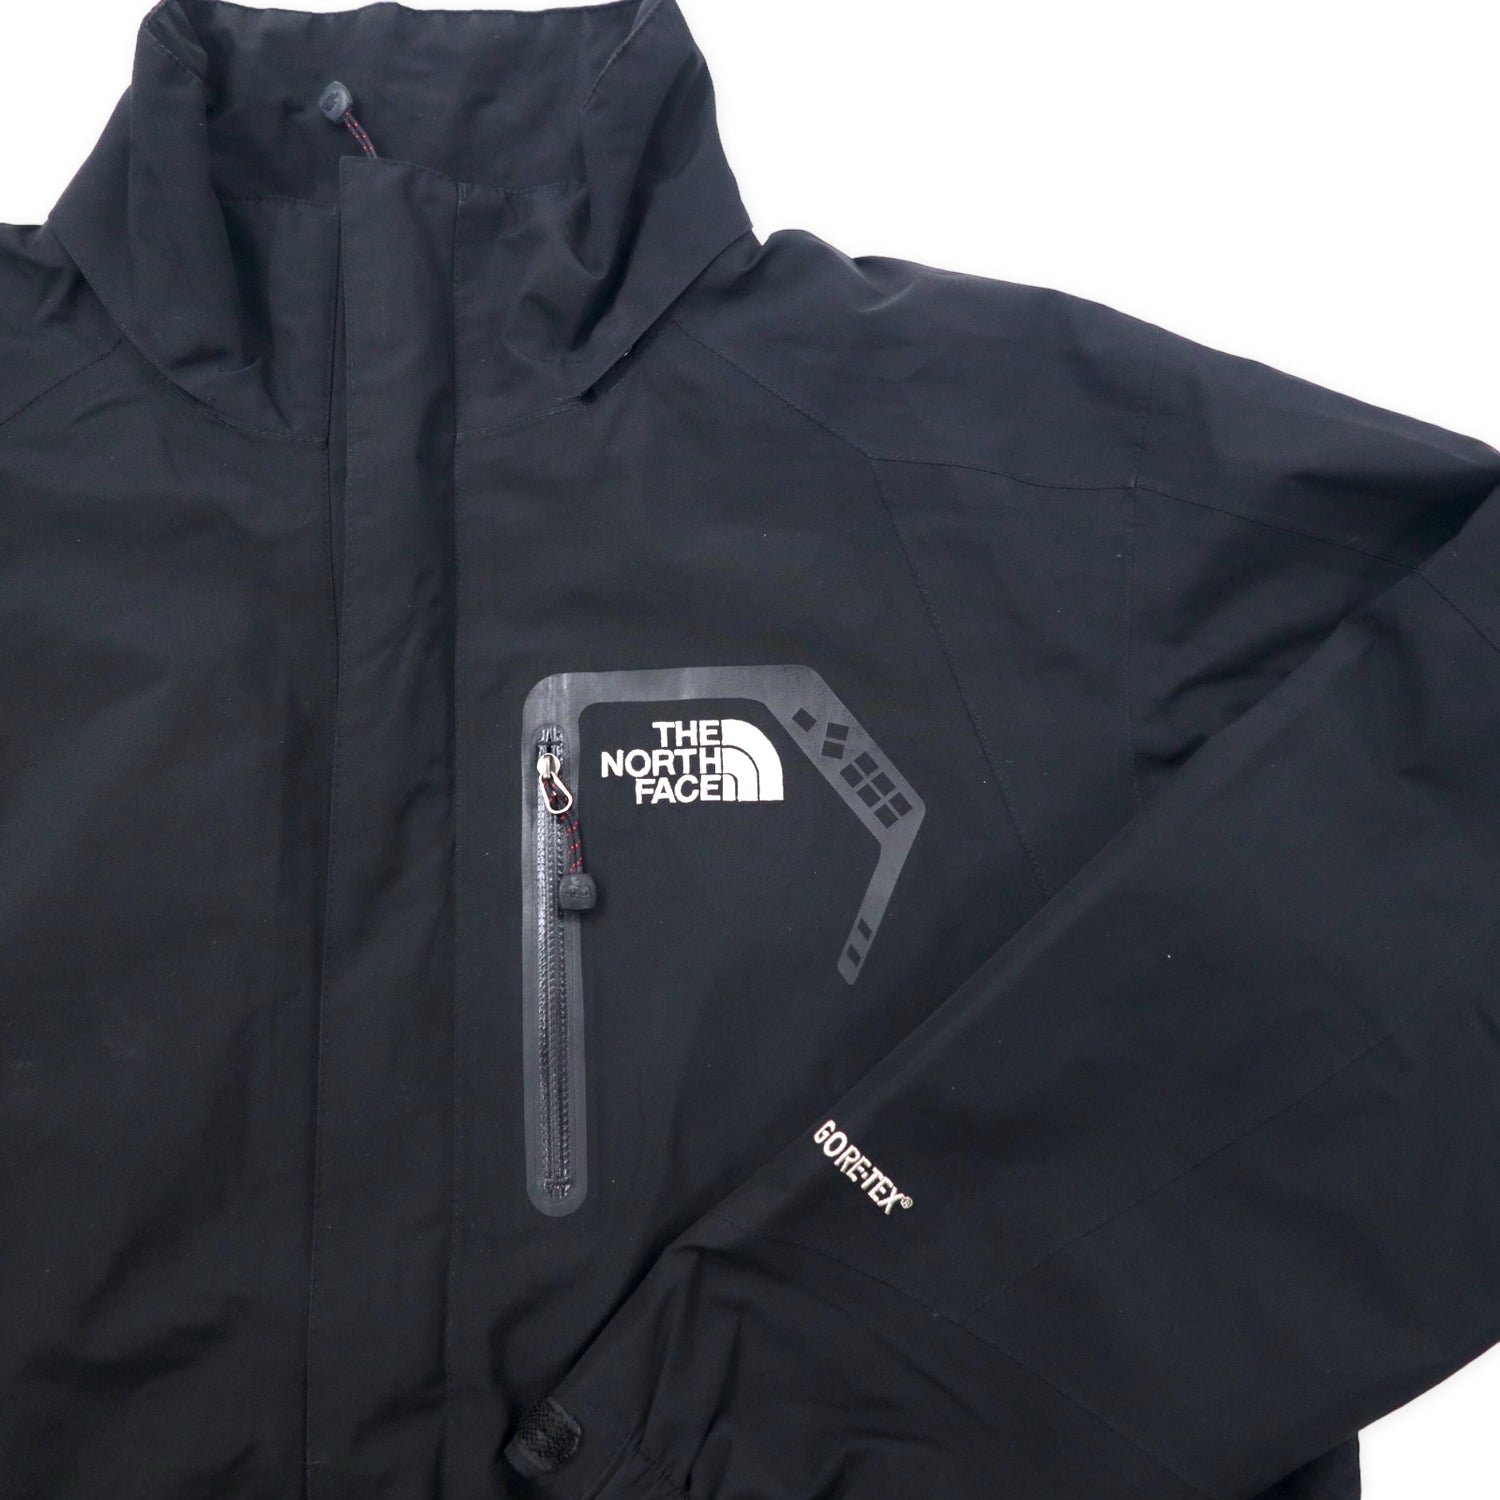 THE NORTH FACE Gore-Tex Mountain Jacket L Black GORE-TEX Double 